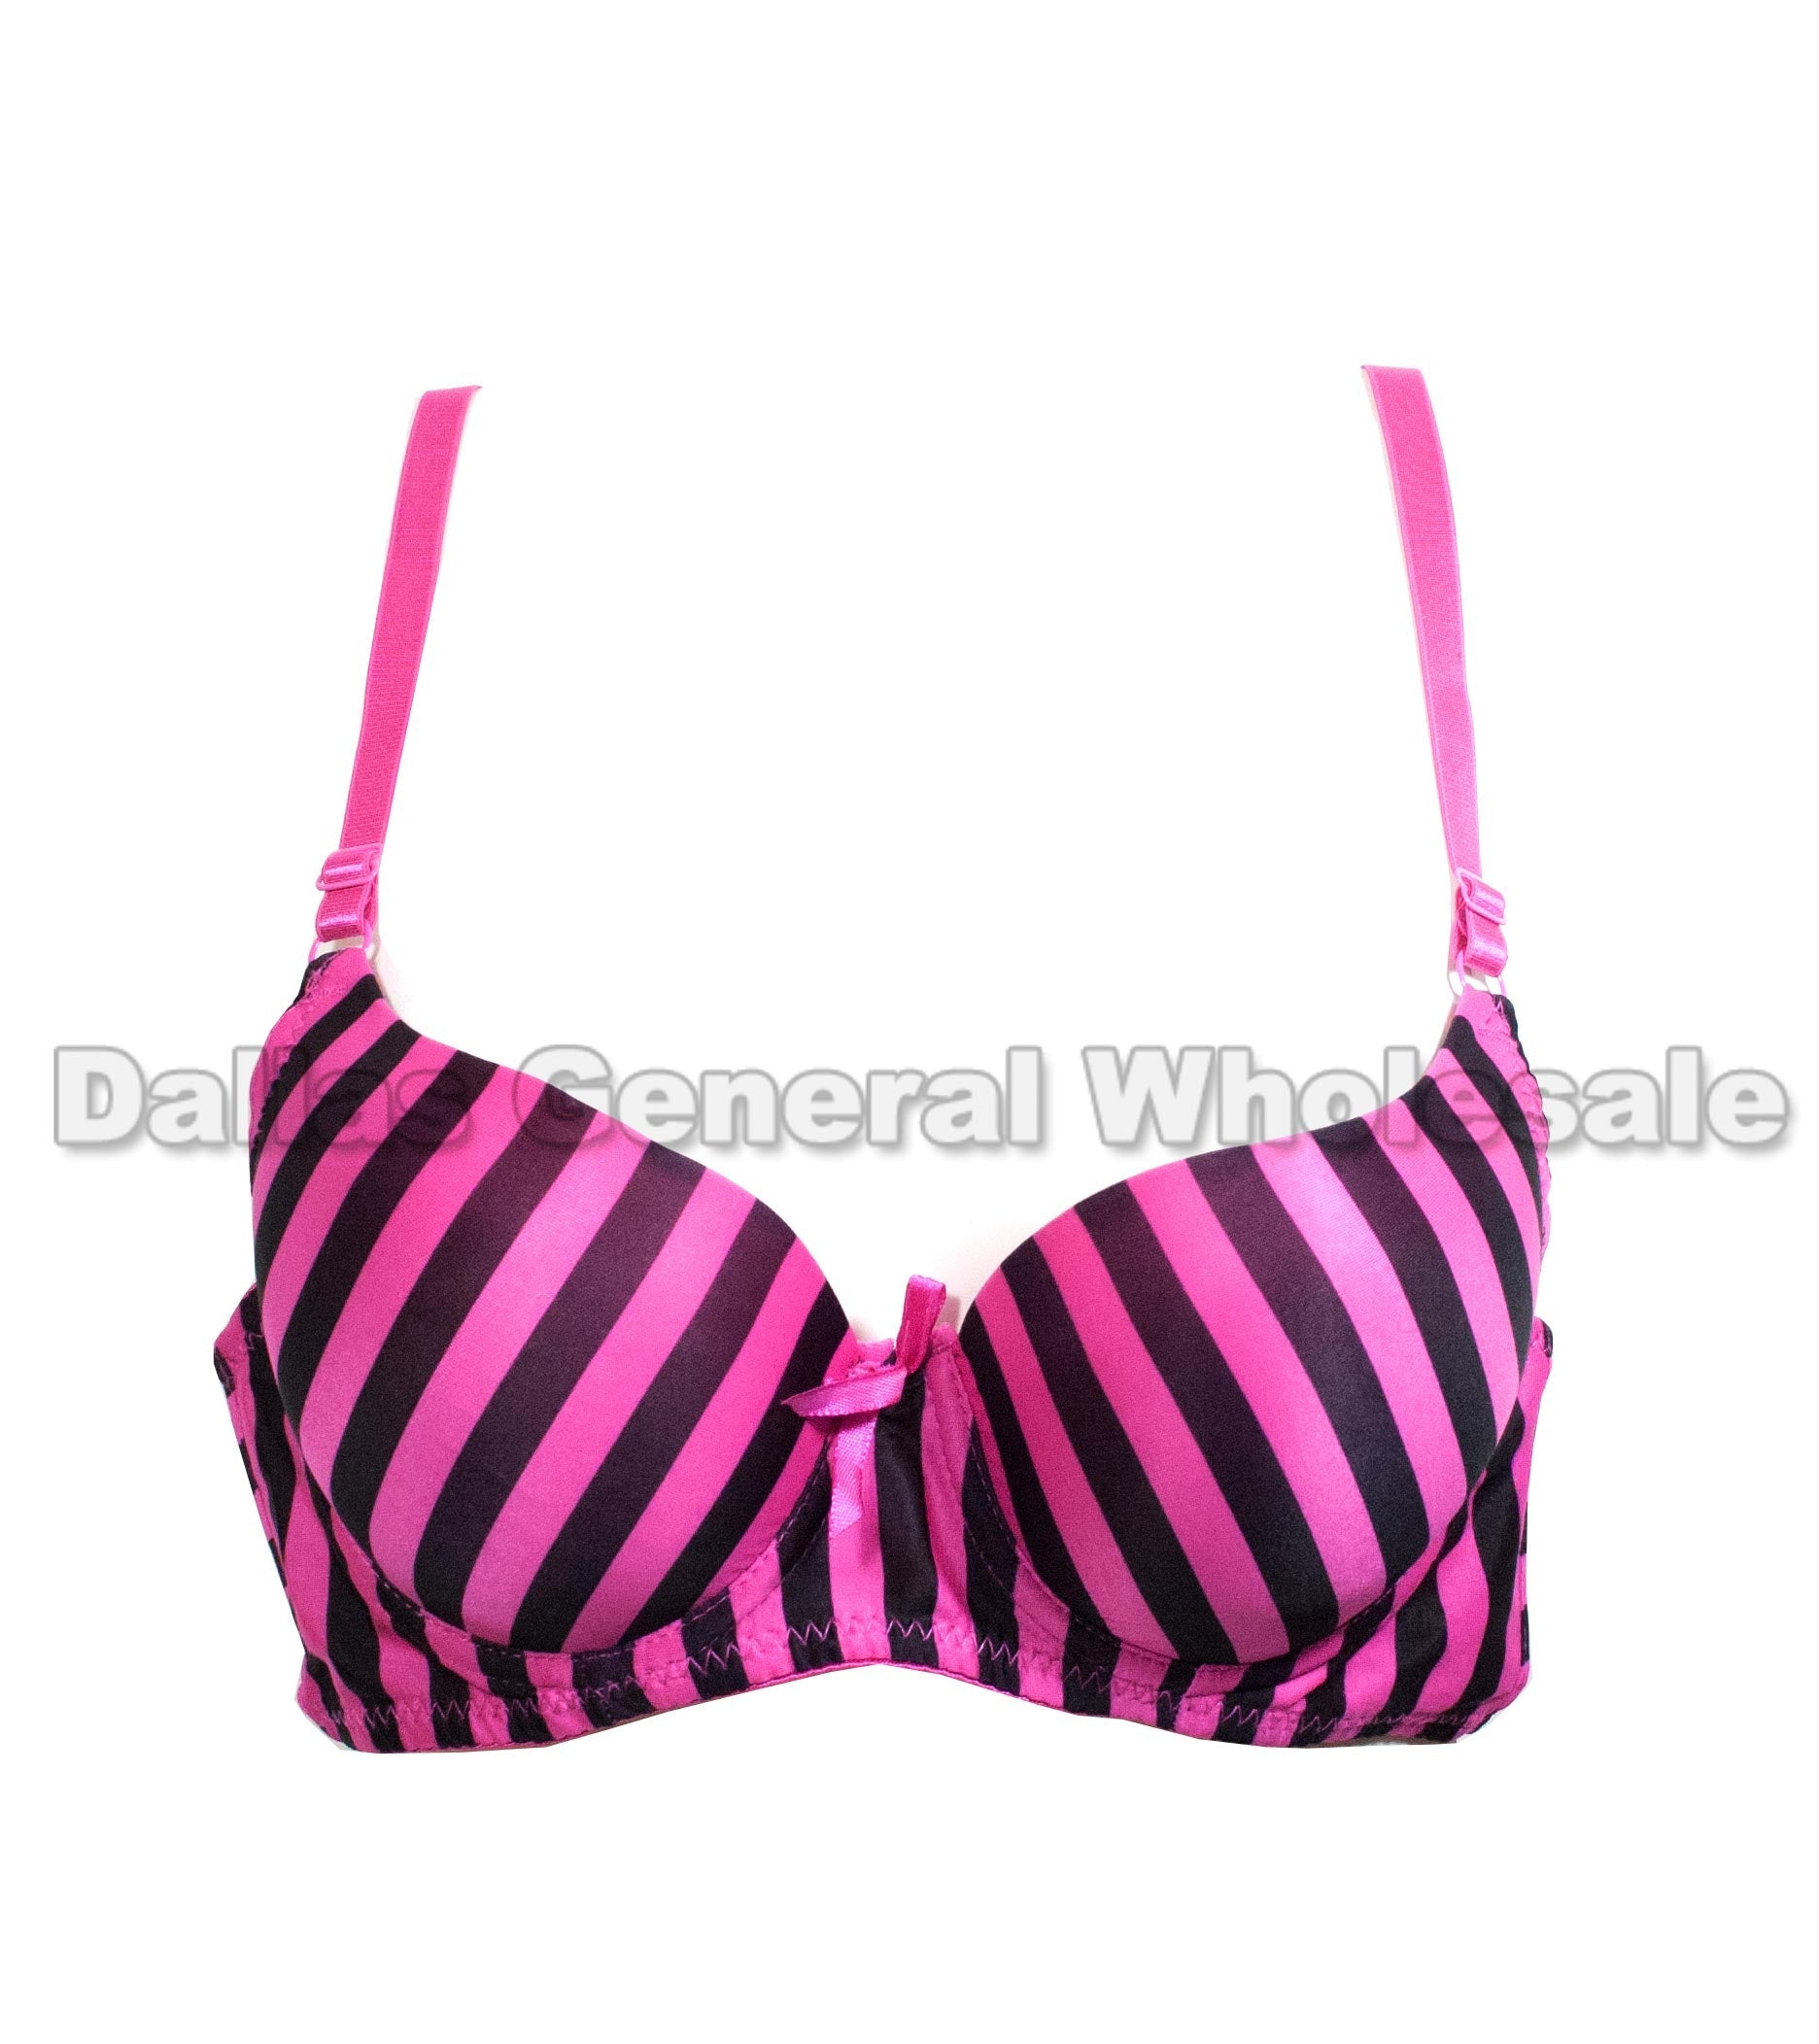 Wholesale size 42c bras For Supportive Underwear 